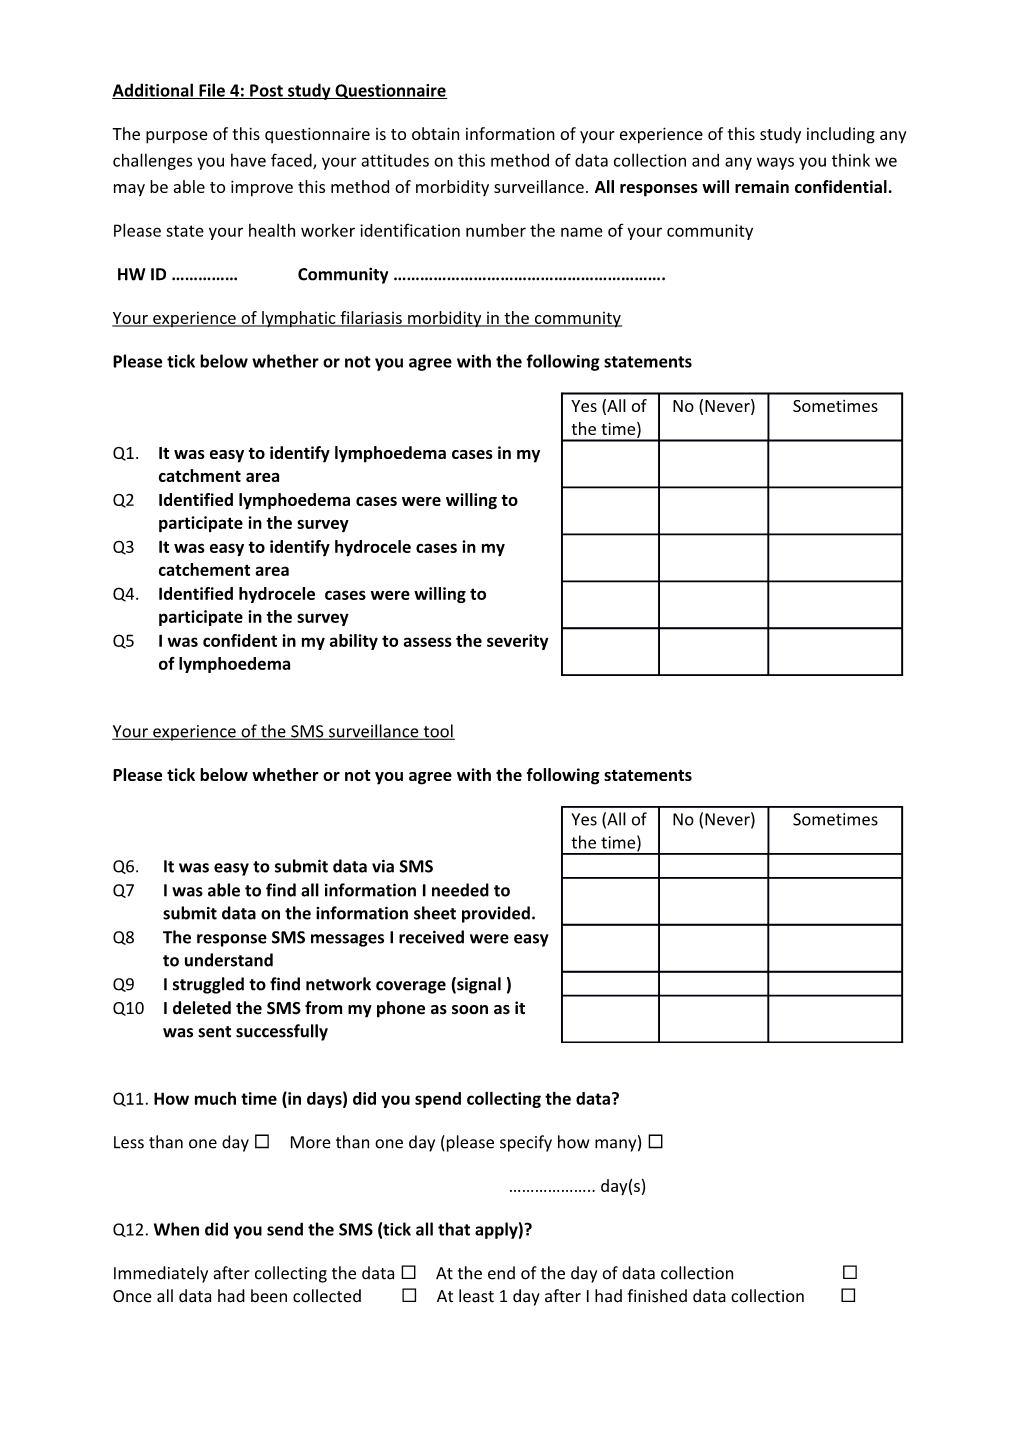 Additional File 4: Post Study Questionnaire